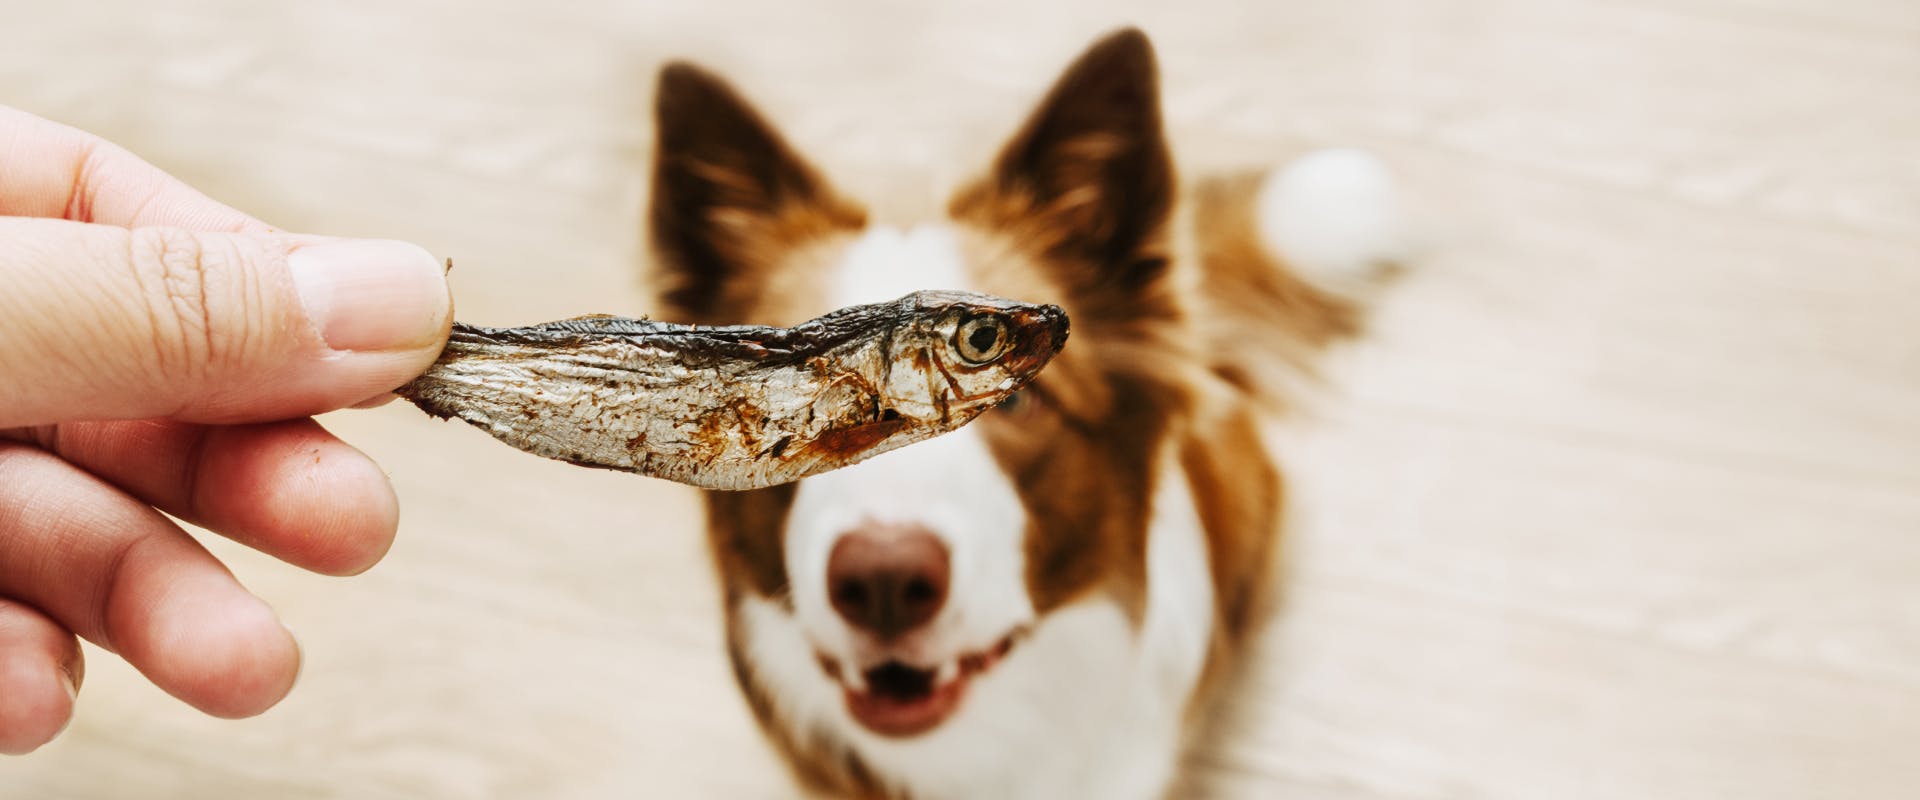 A dog being offered some fish.